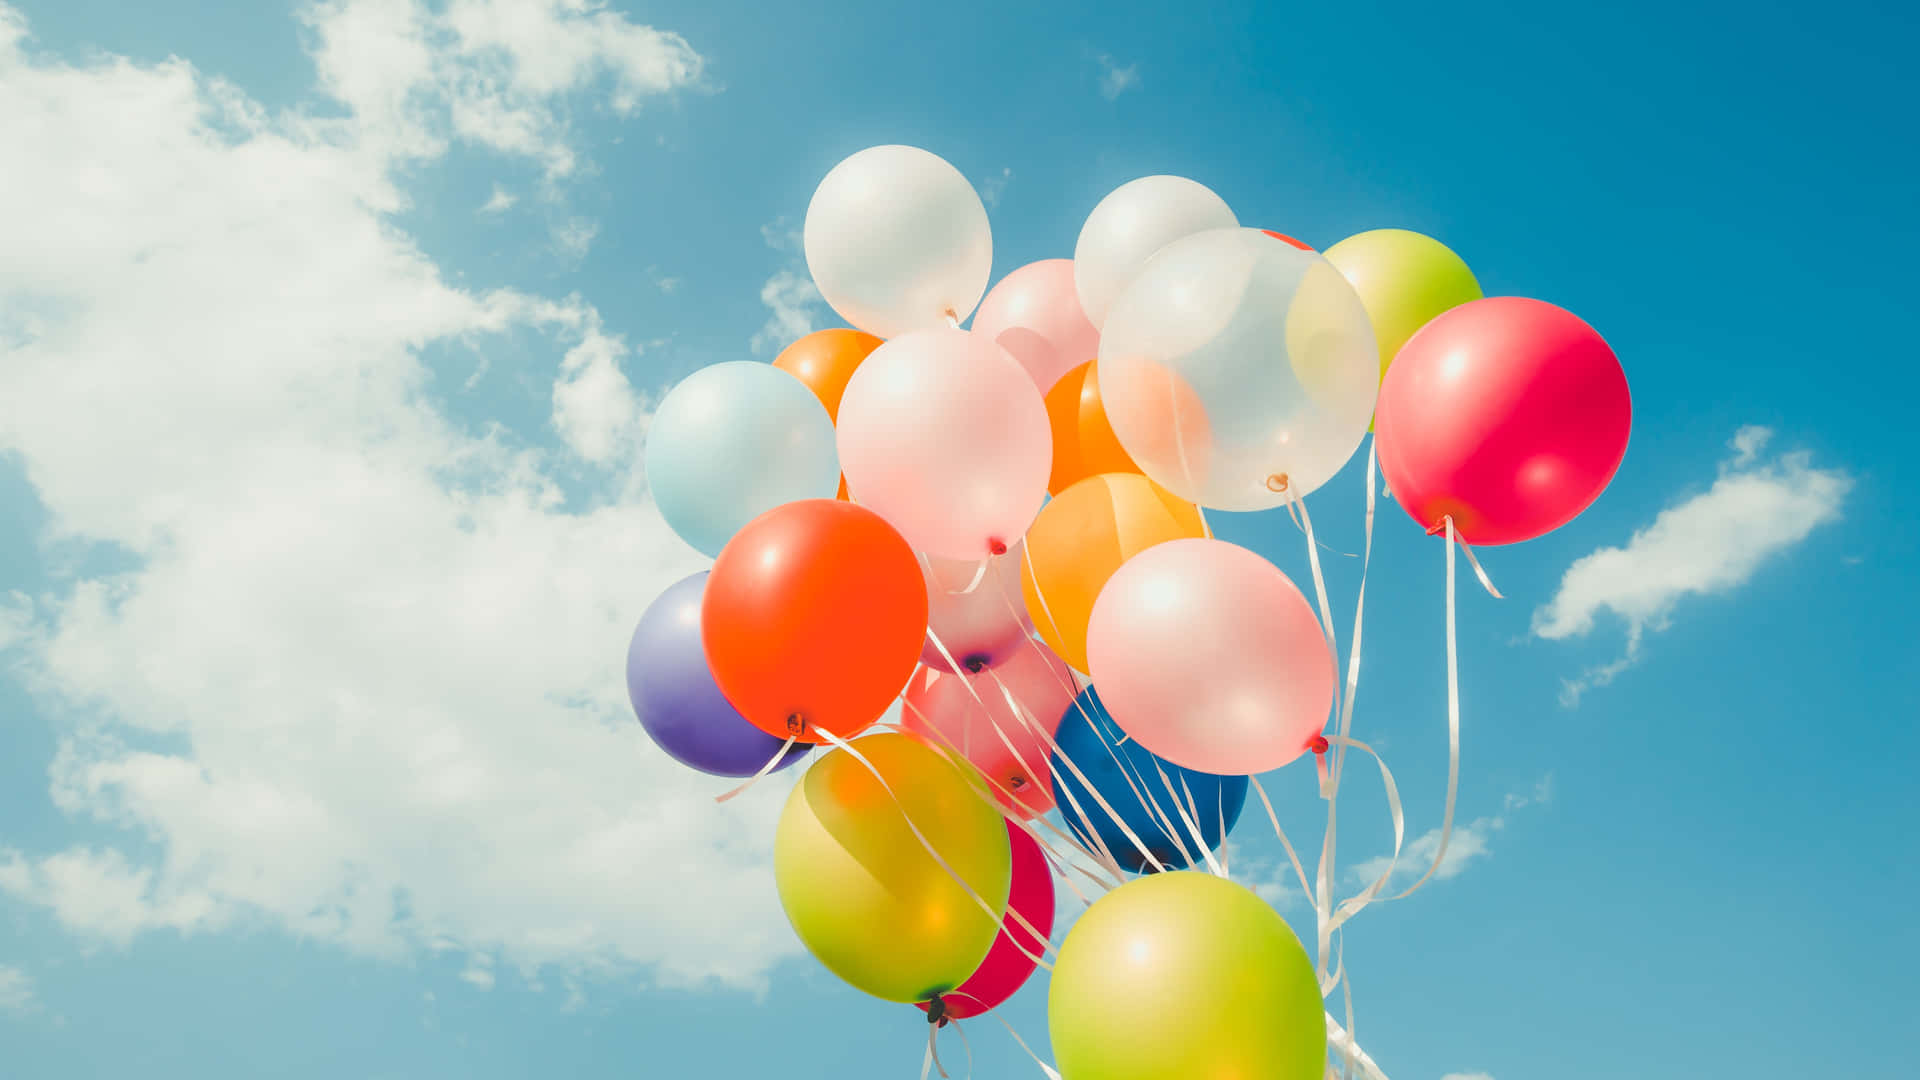 Birthday Balloons Floating In Blue Cloudy Sky Picture